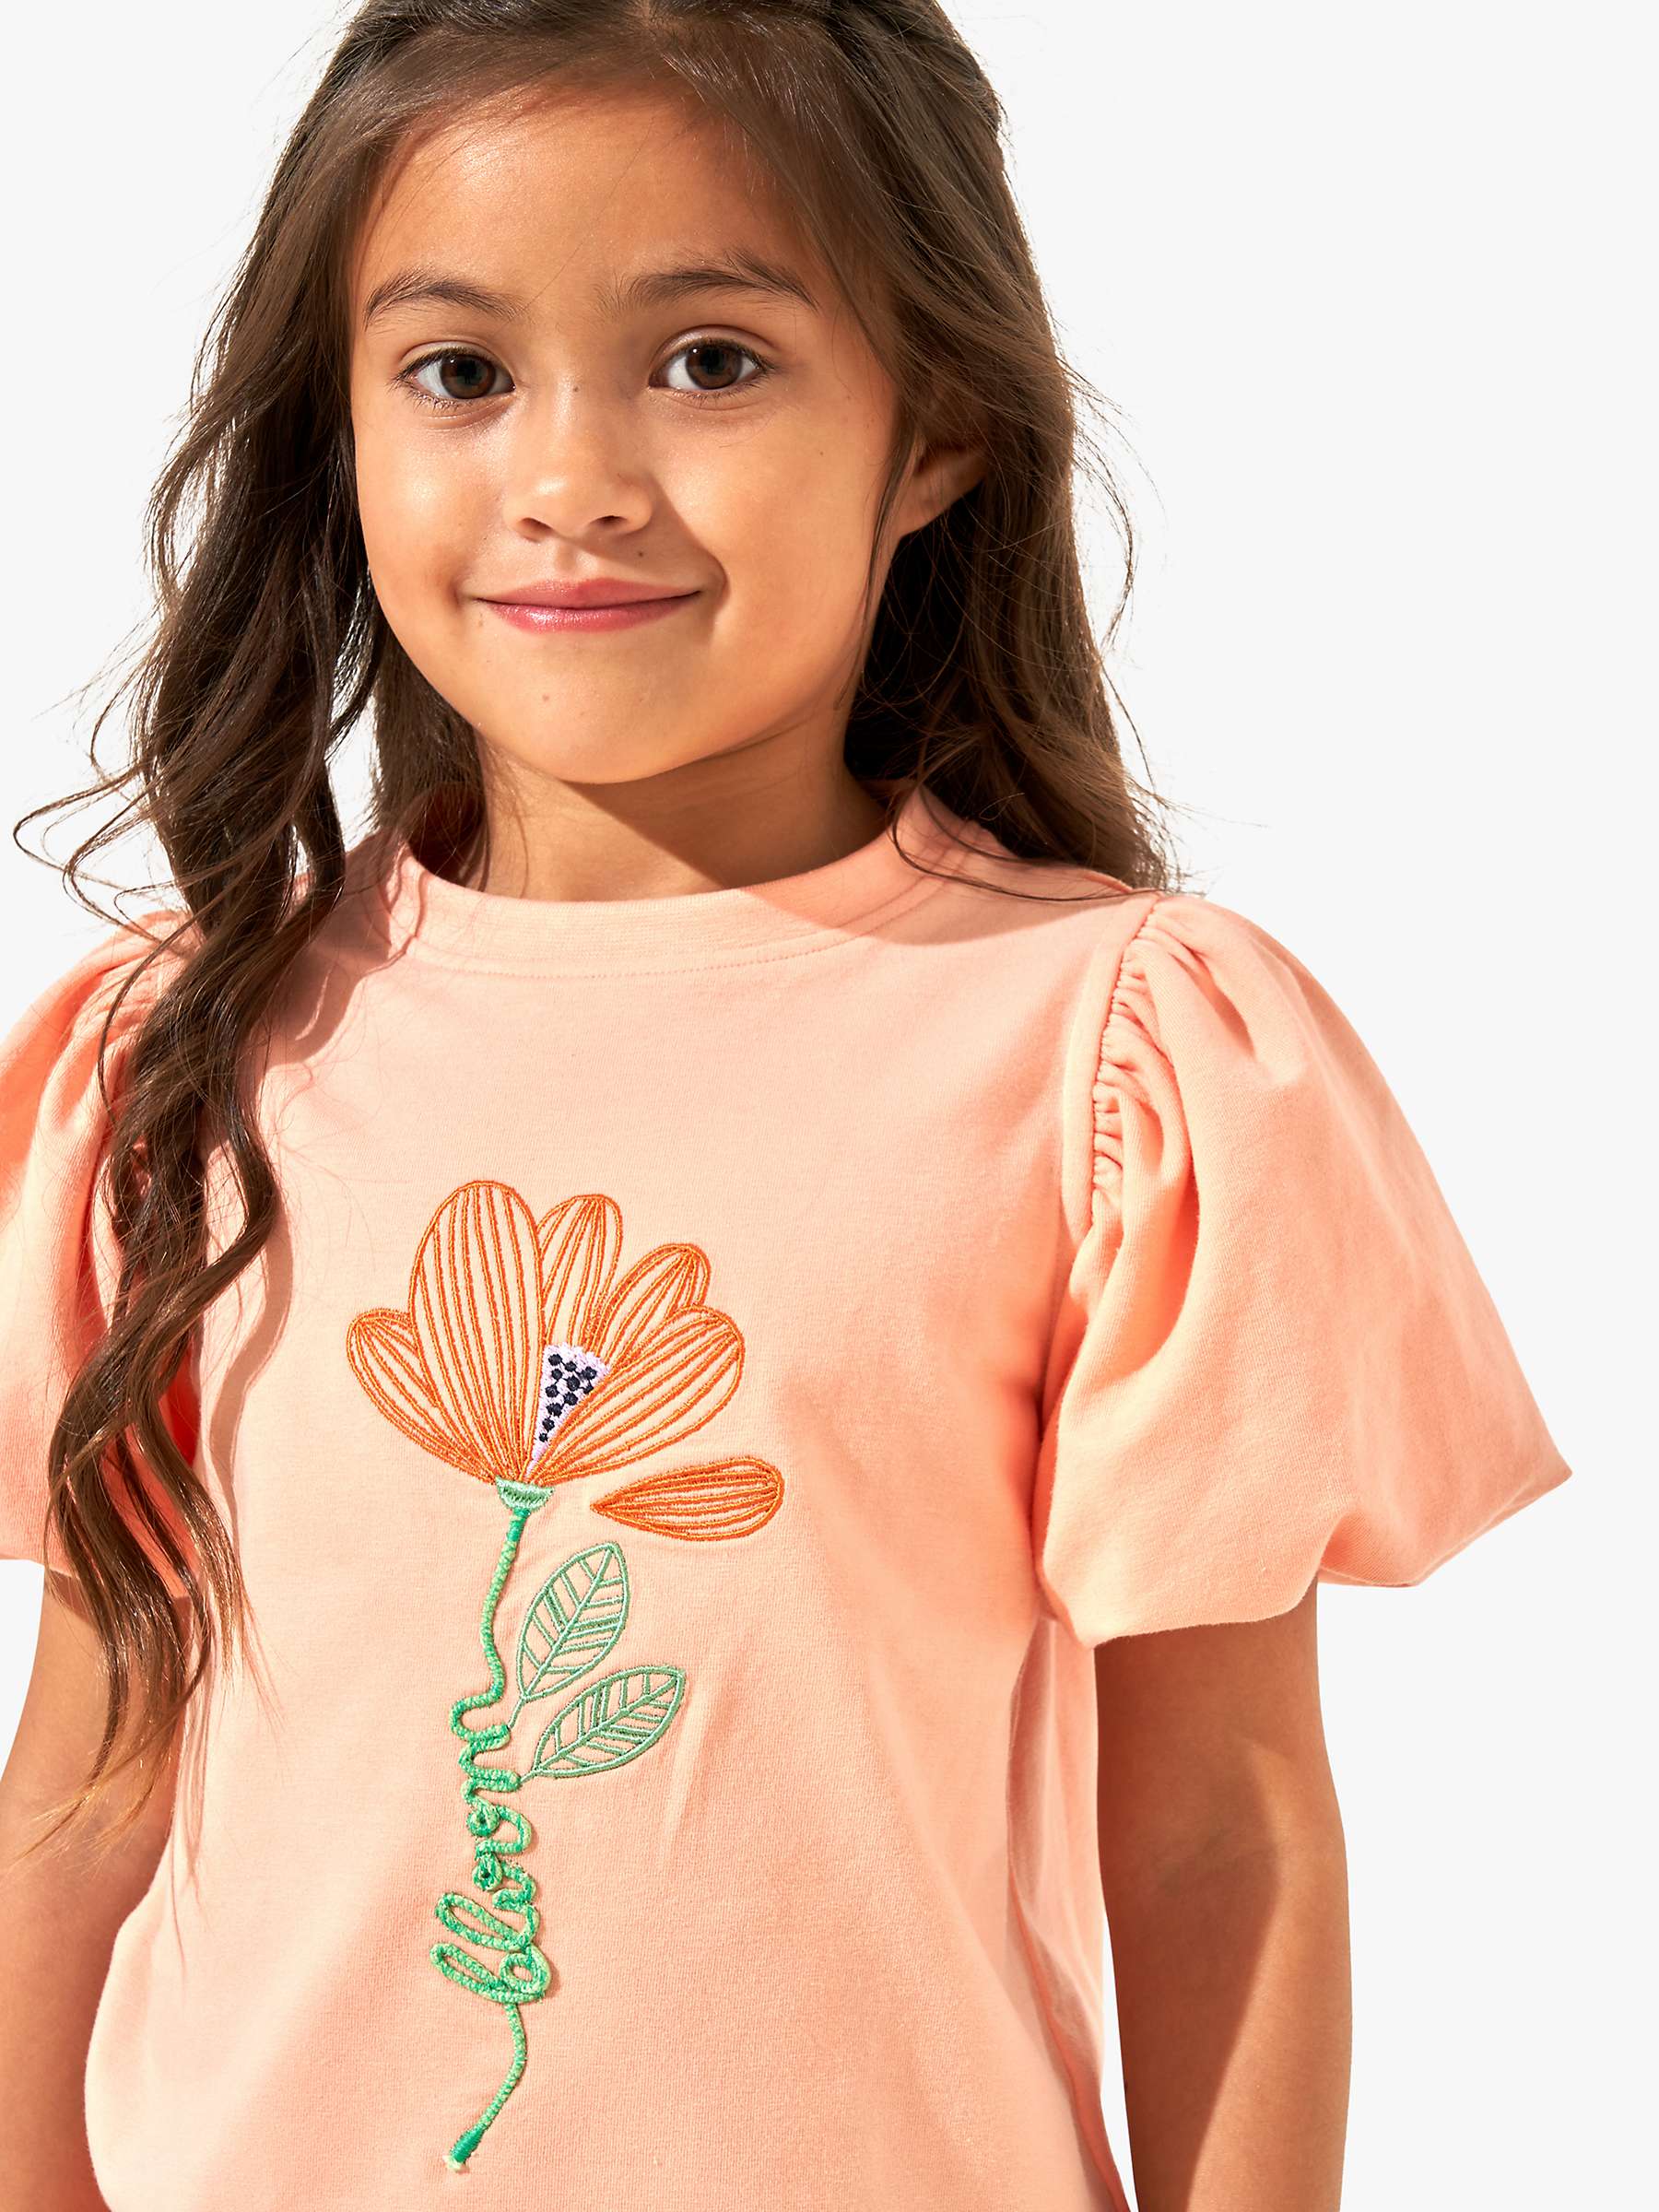 Buy Angel & Rocket Kids' Embroidered Puff Sleeve Top, Apricot Online at johnlewis.com